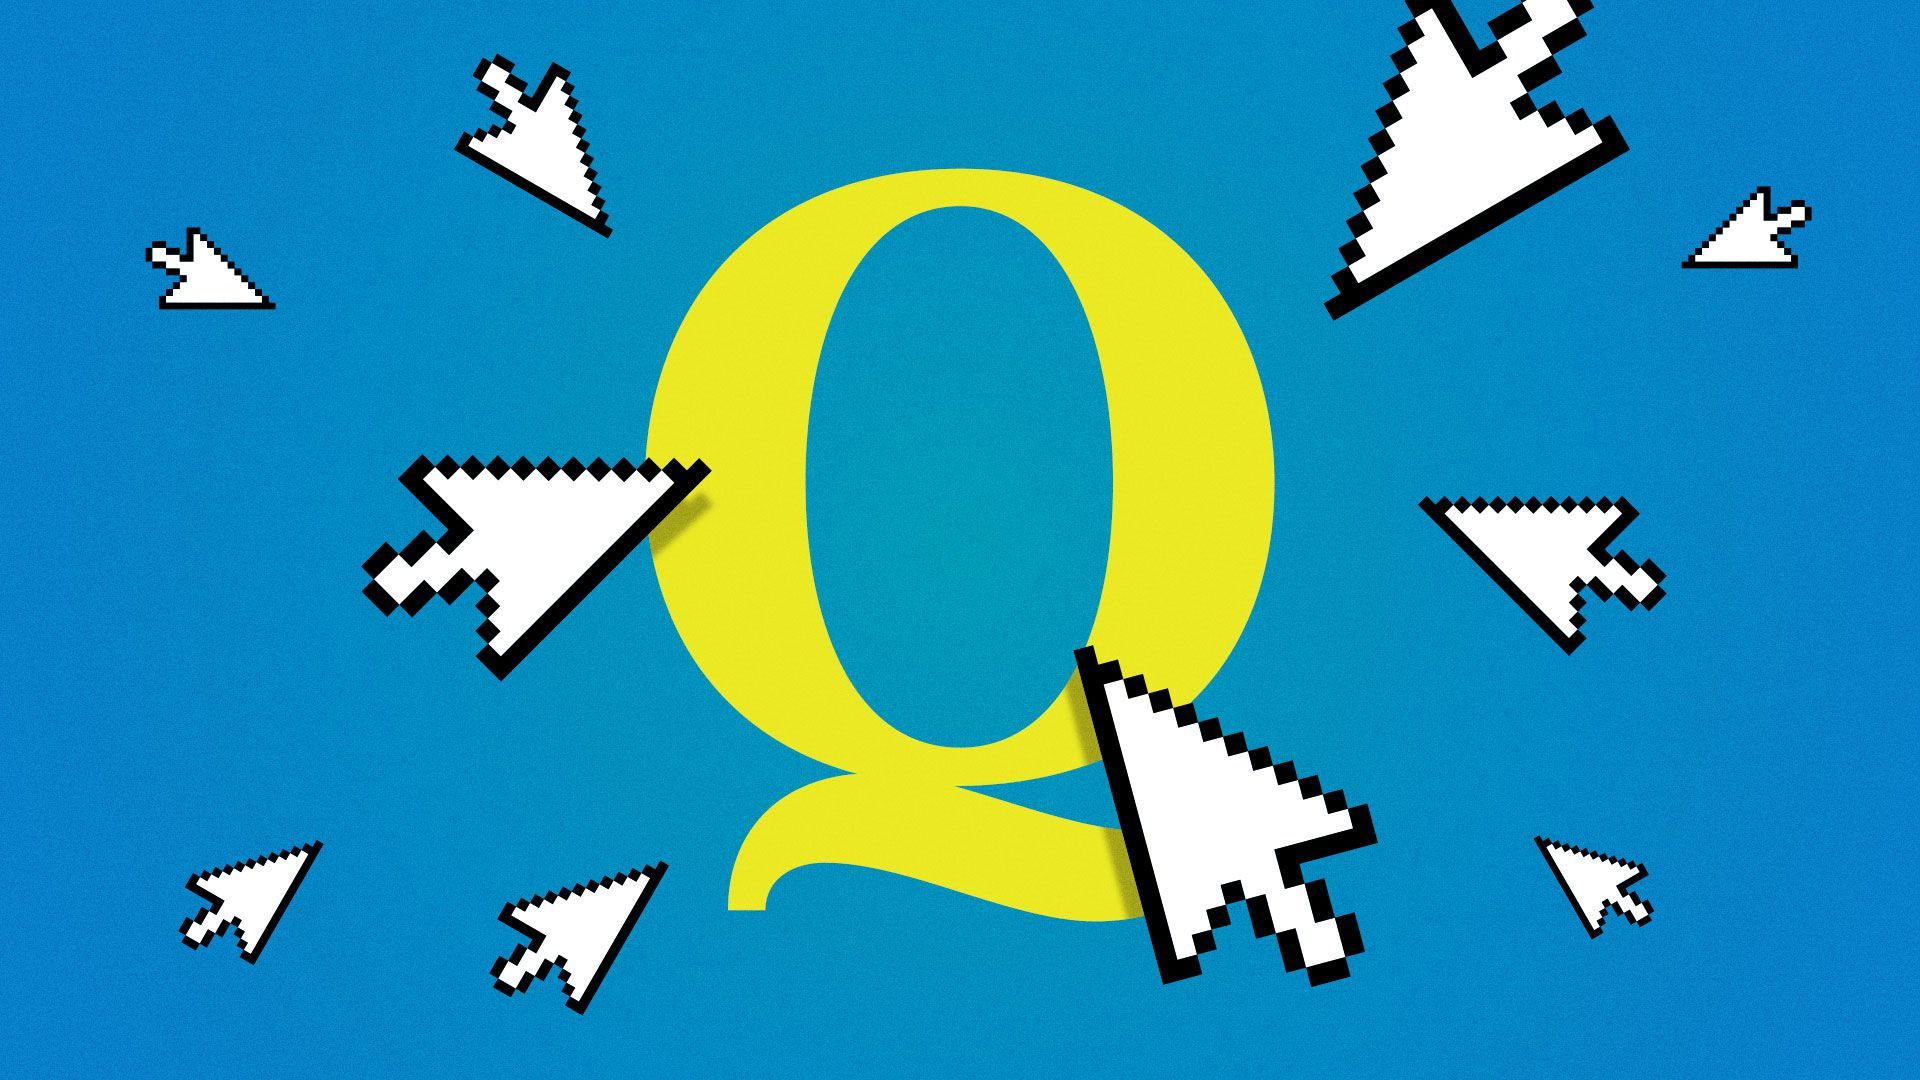 Illustration of Q surrounded by cursors